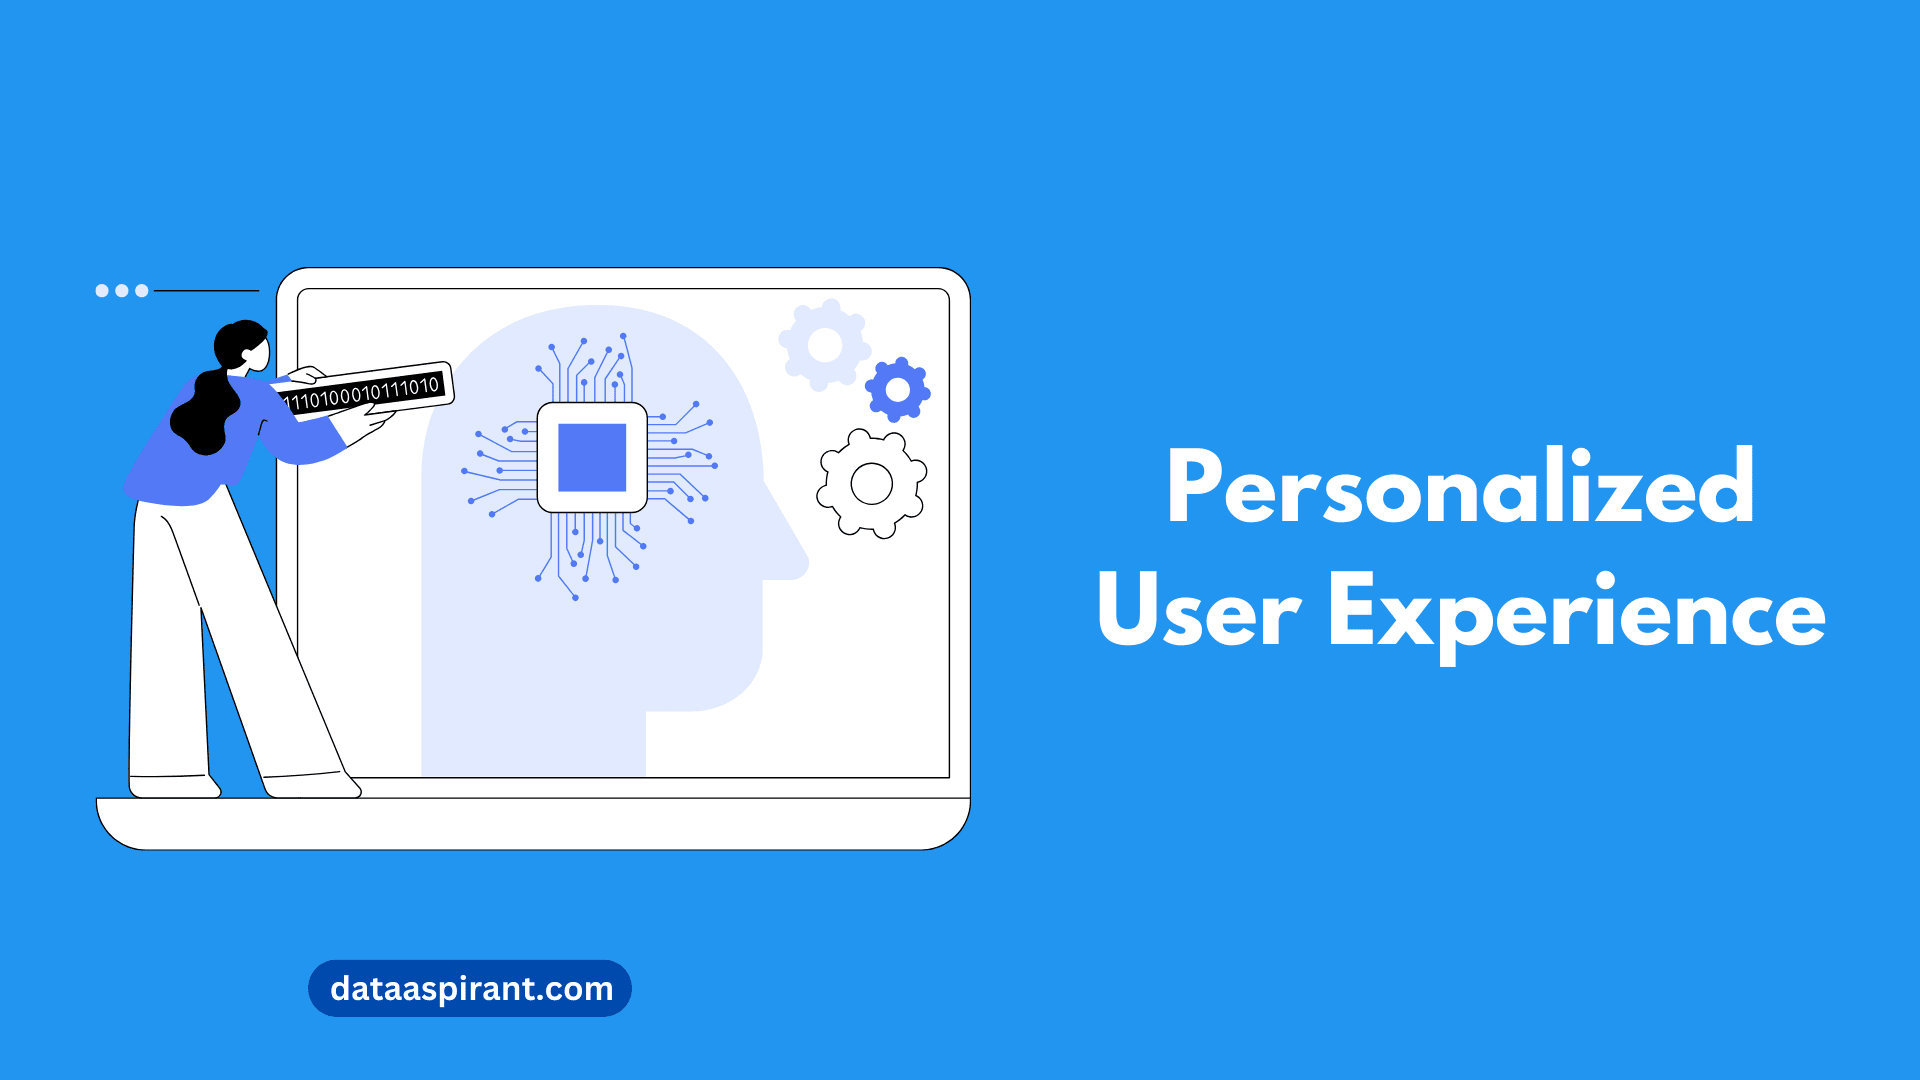 Personalized User Experience